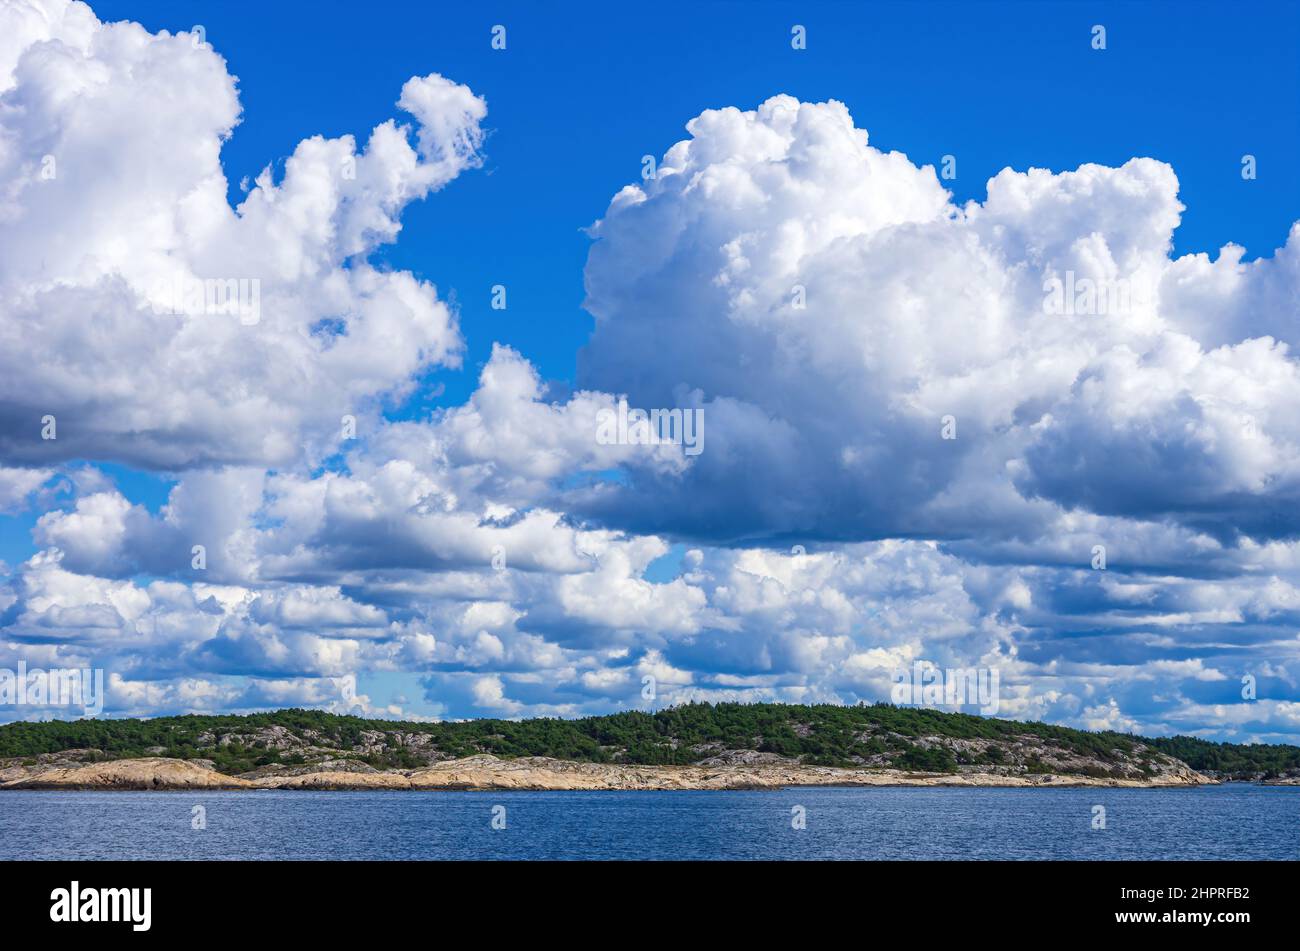 Skerries and coastline under a bright cloudy blue sky in the Koster fjord between the Koster islands and Strömstad, Bohuslän, Sweden. Stock Photo